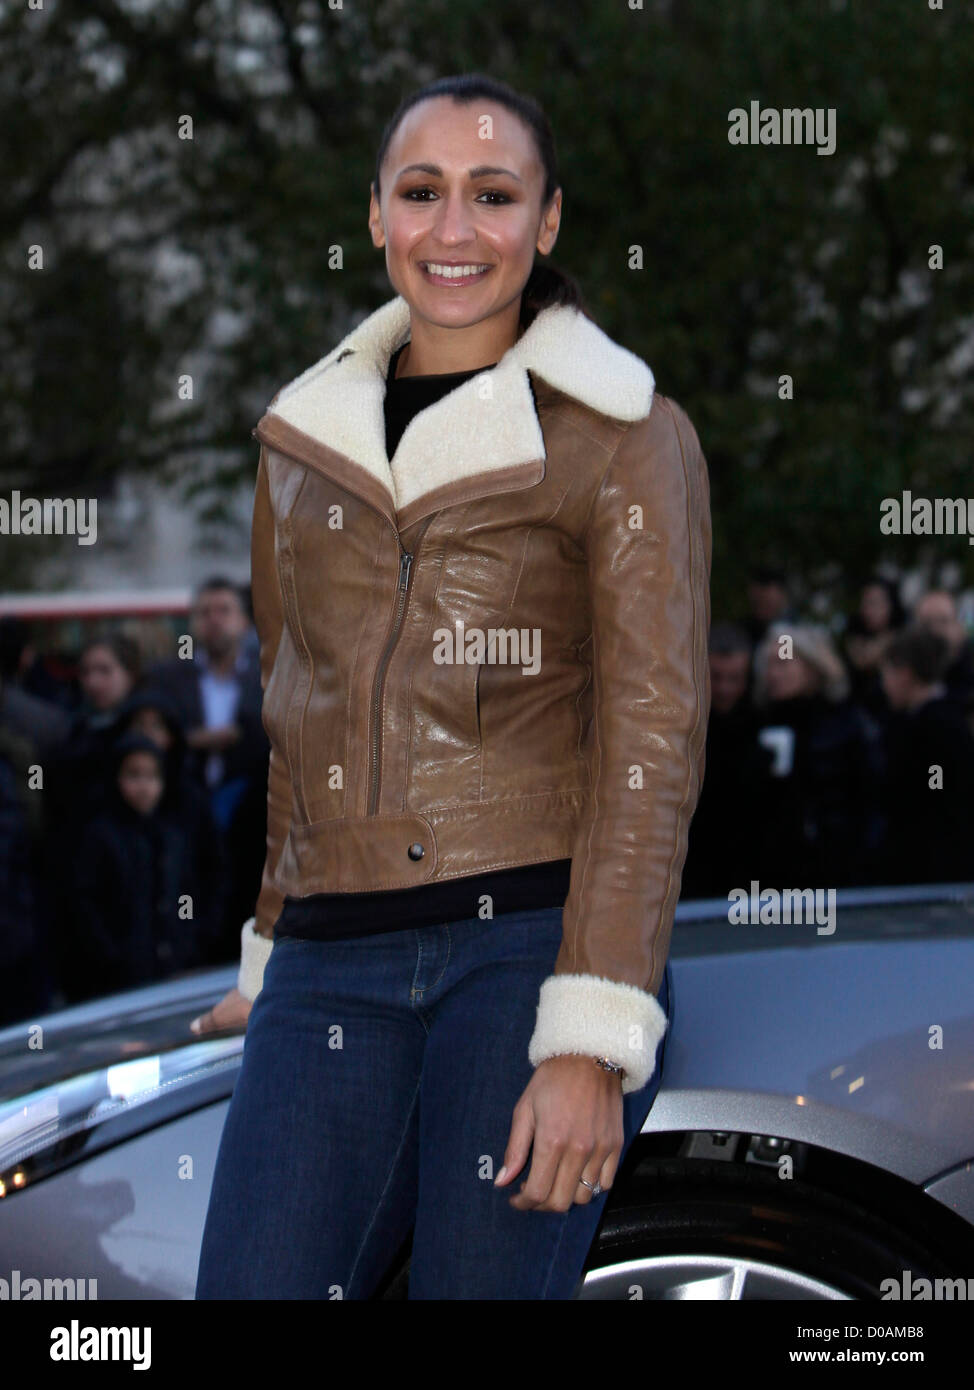 Olympic gold medallist Jessica Ennis posed with the all new Jaguar F-TYPE and gave a press conference near st. pauls cathedral, 01/12/2012 Stock Photo